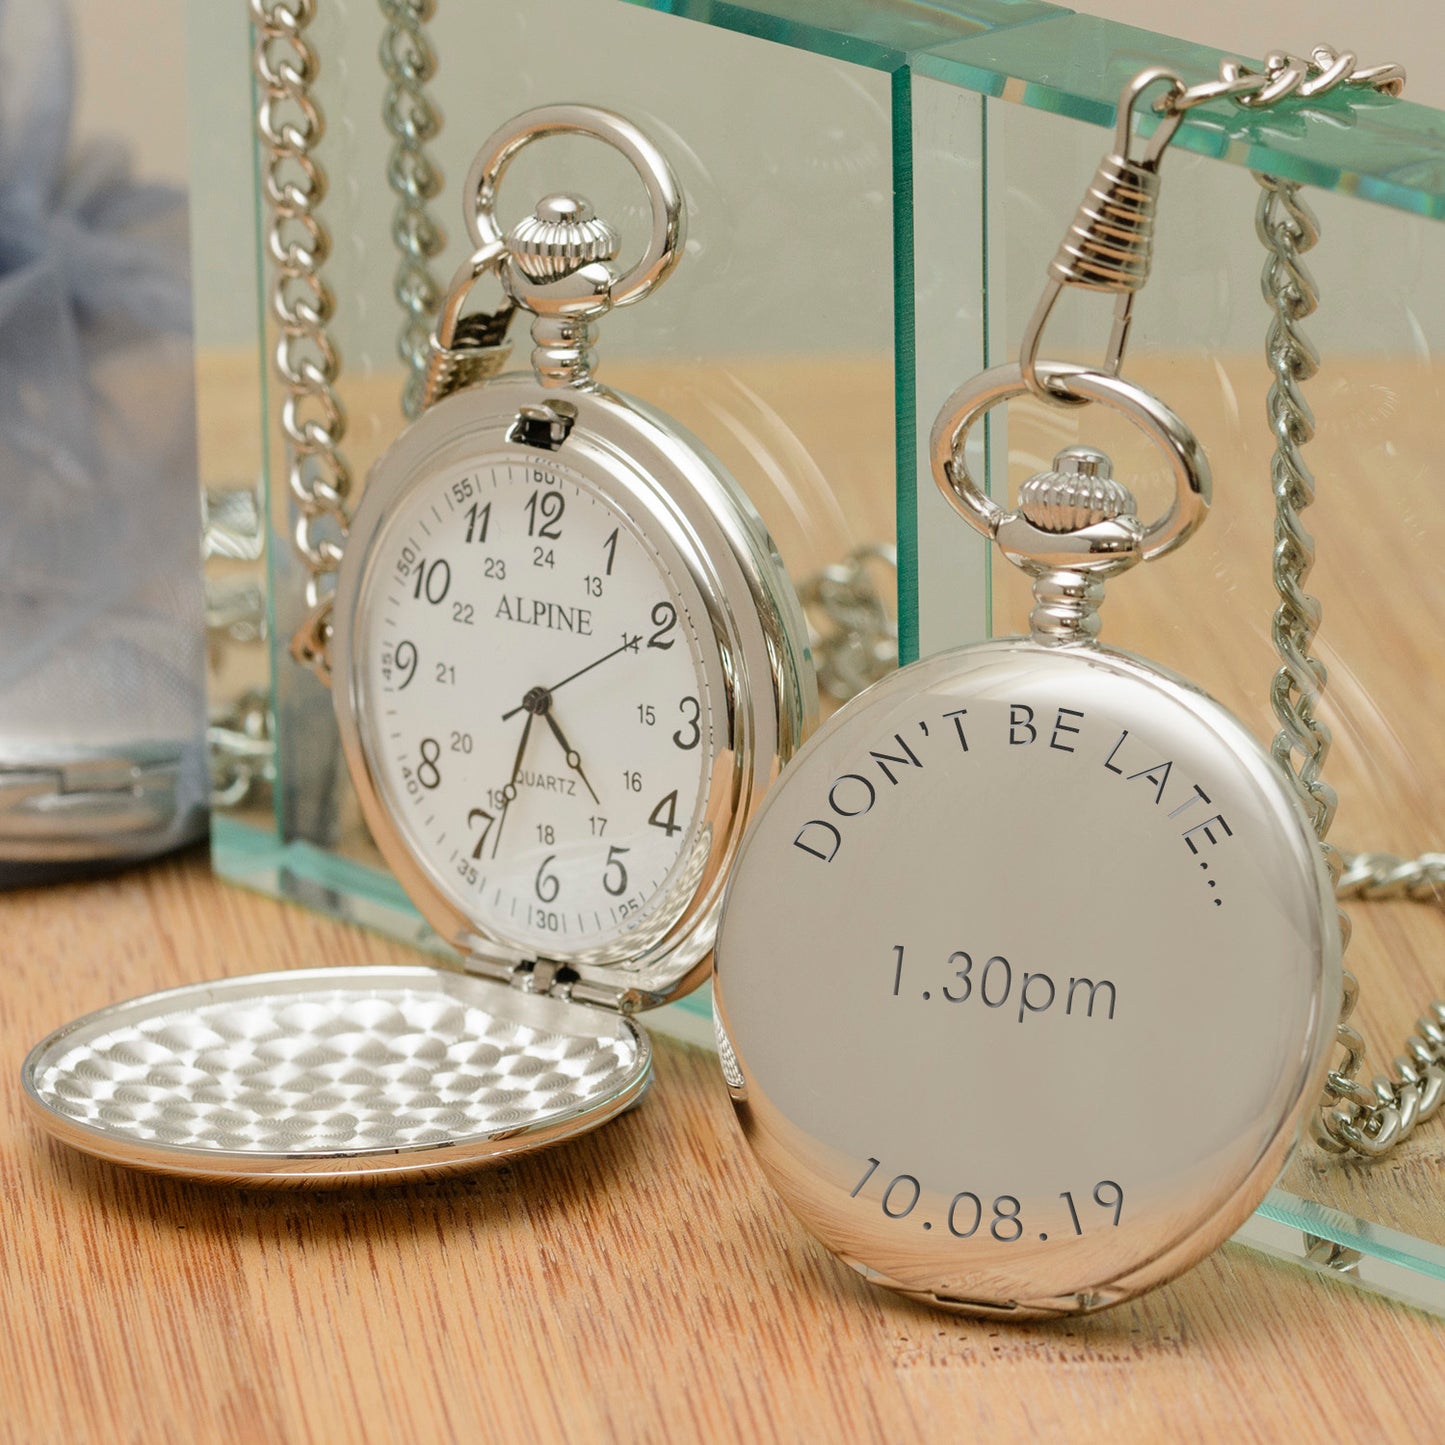 Engraved Pocket Watch For Groom - Dont be late...